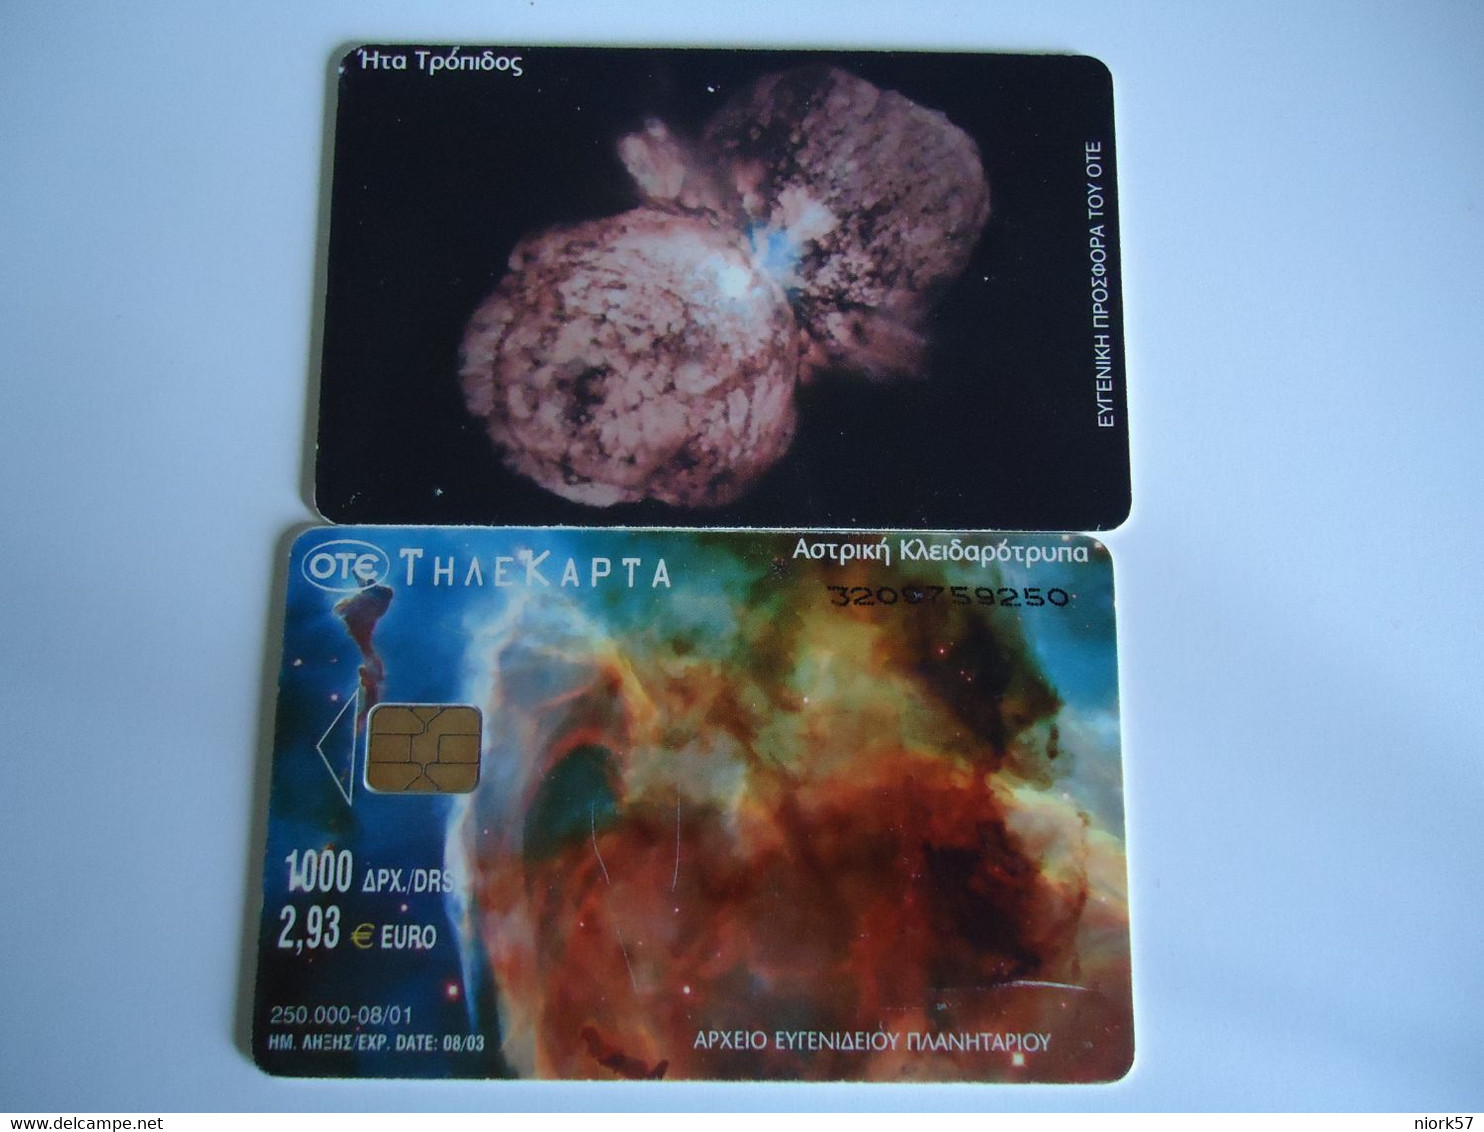 GREECE  USED  CARDS  PLANET  SPACE - Espace